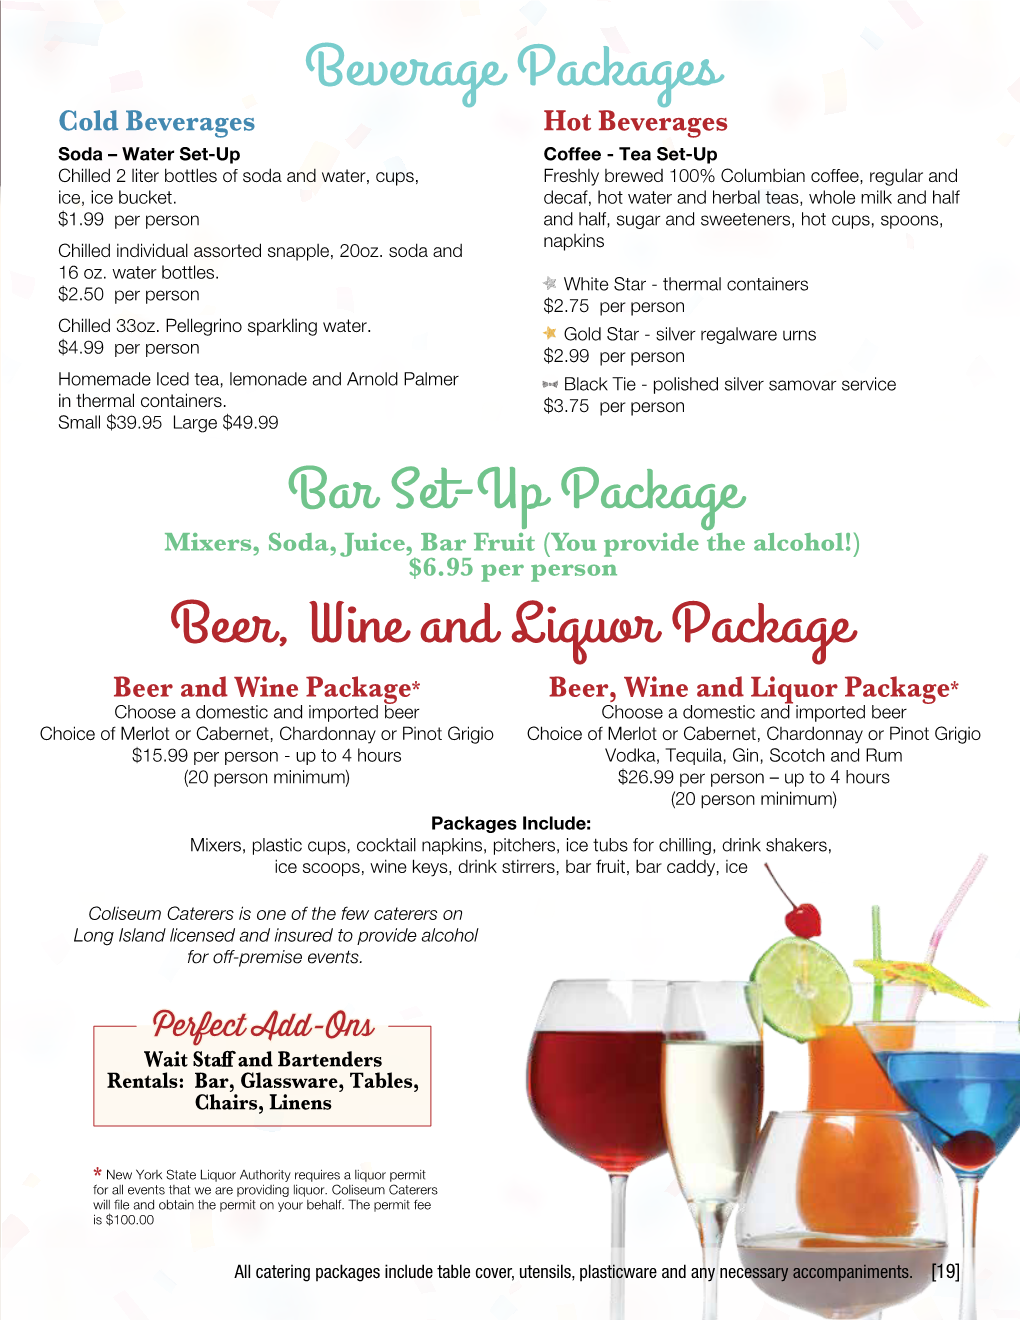 Beer, Wine and Liquor Package